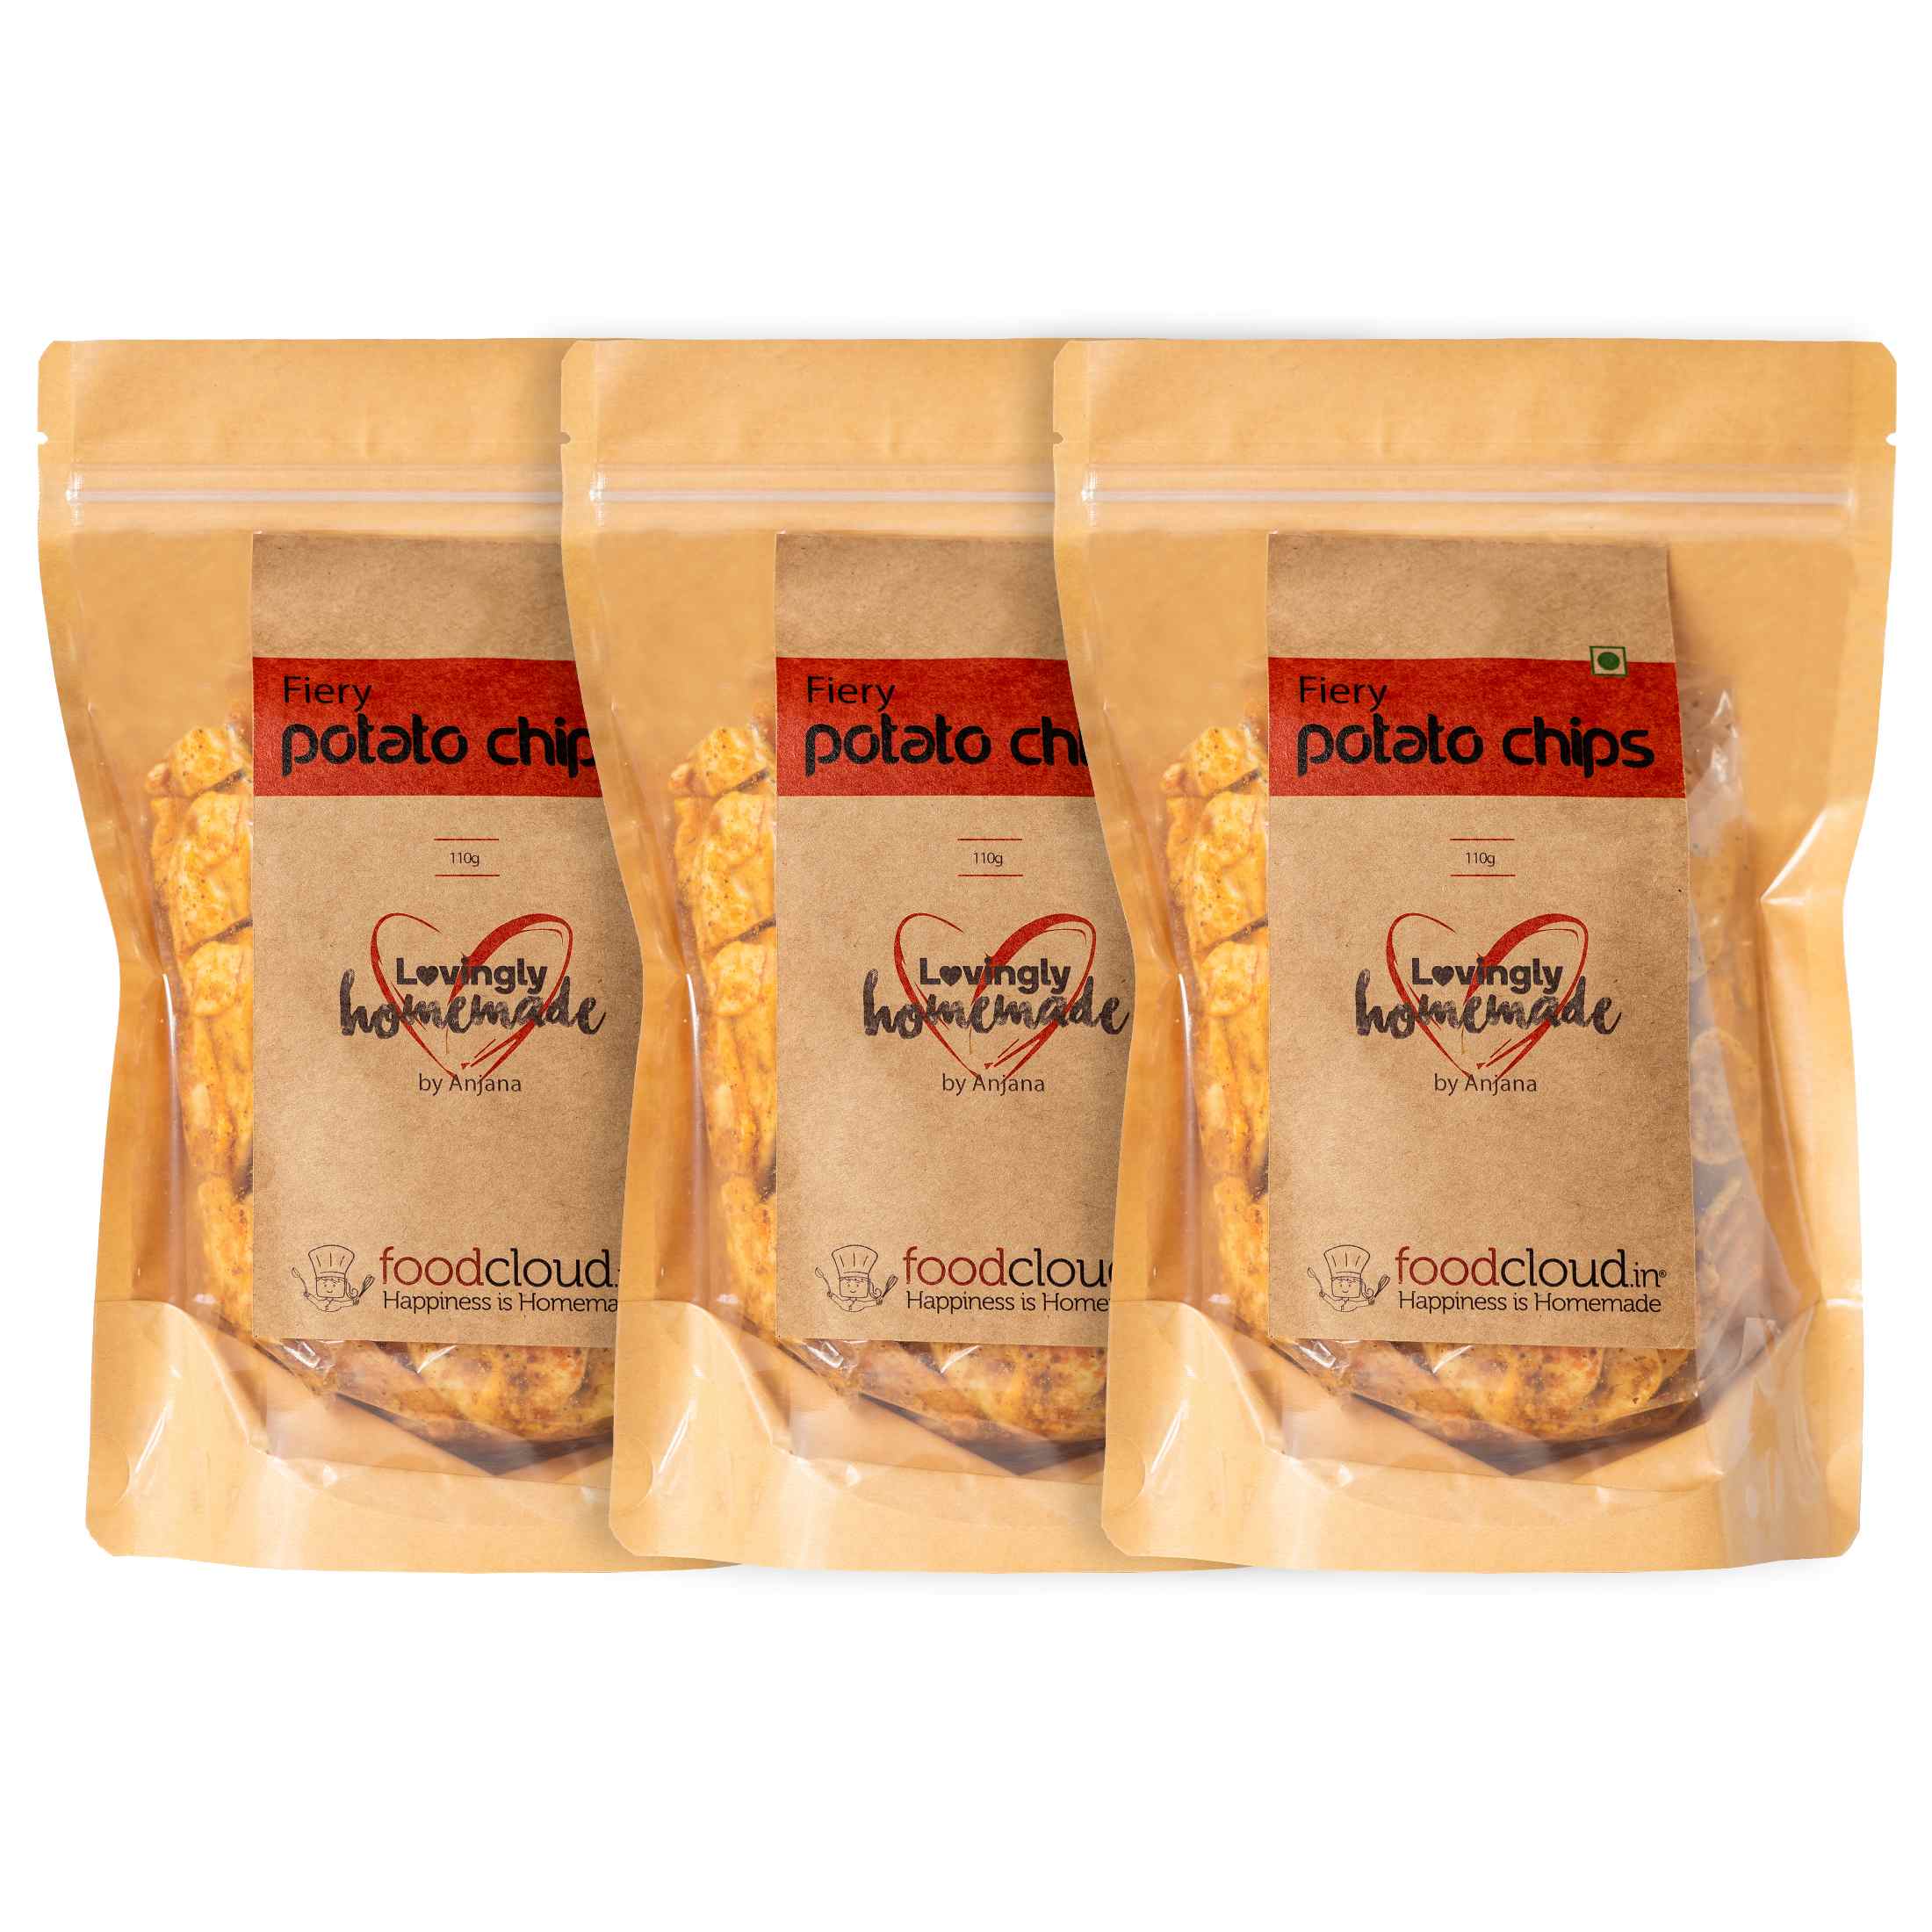 Product: FoodCloud Fiery Potato Chips (Pack of 3)